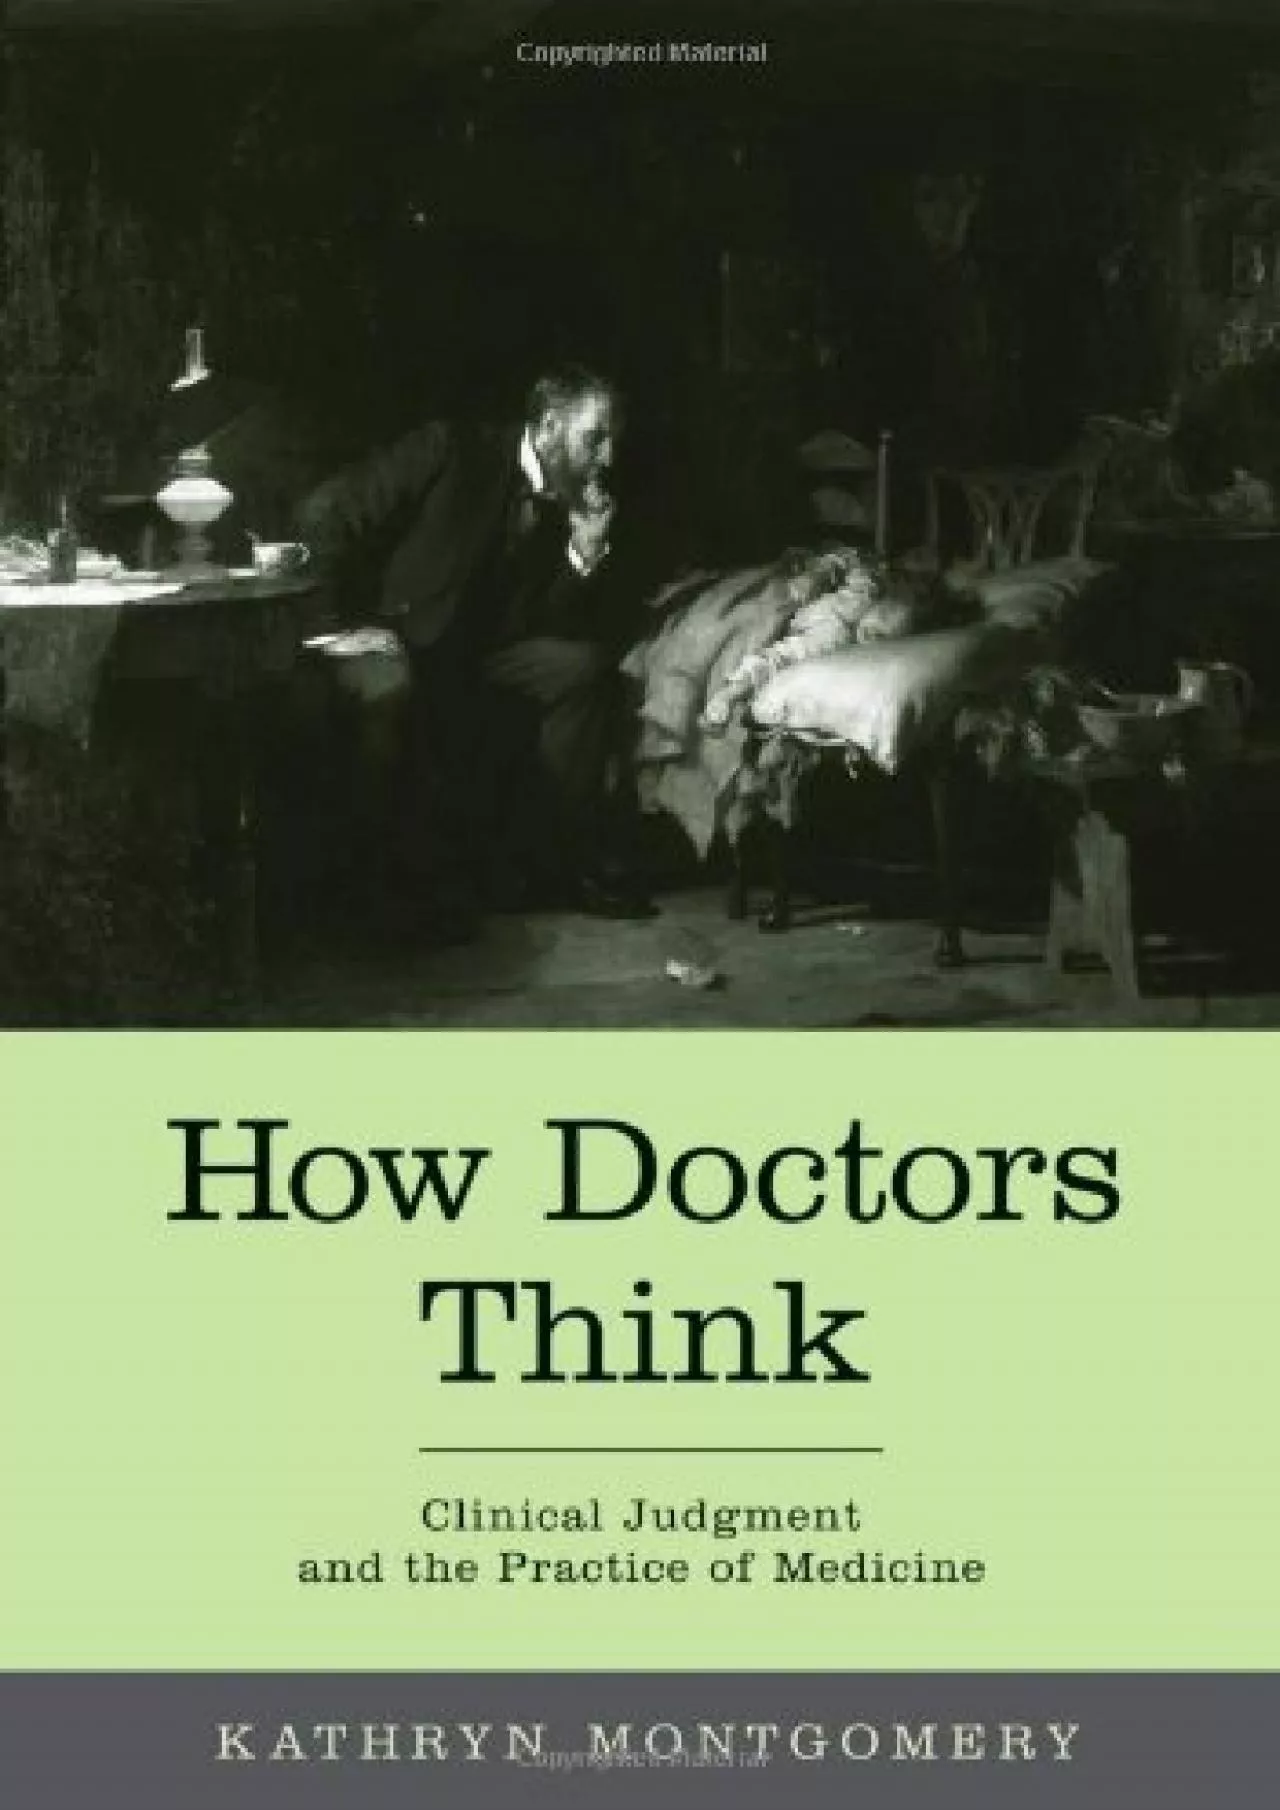 (EBOOK)-How Doctors Think: Clinical Judgment and the Practice of Medicine